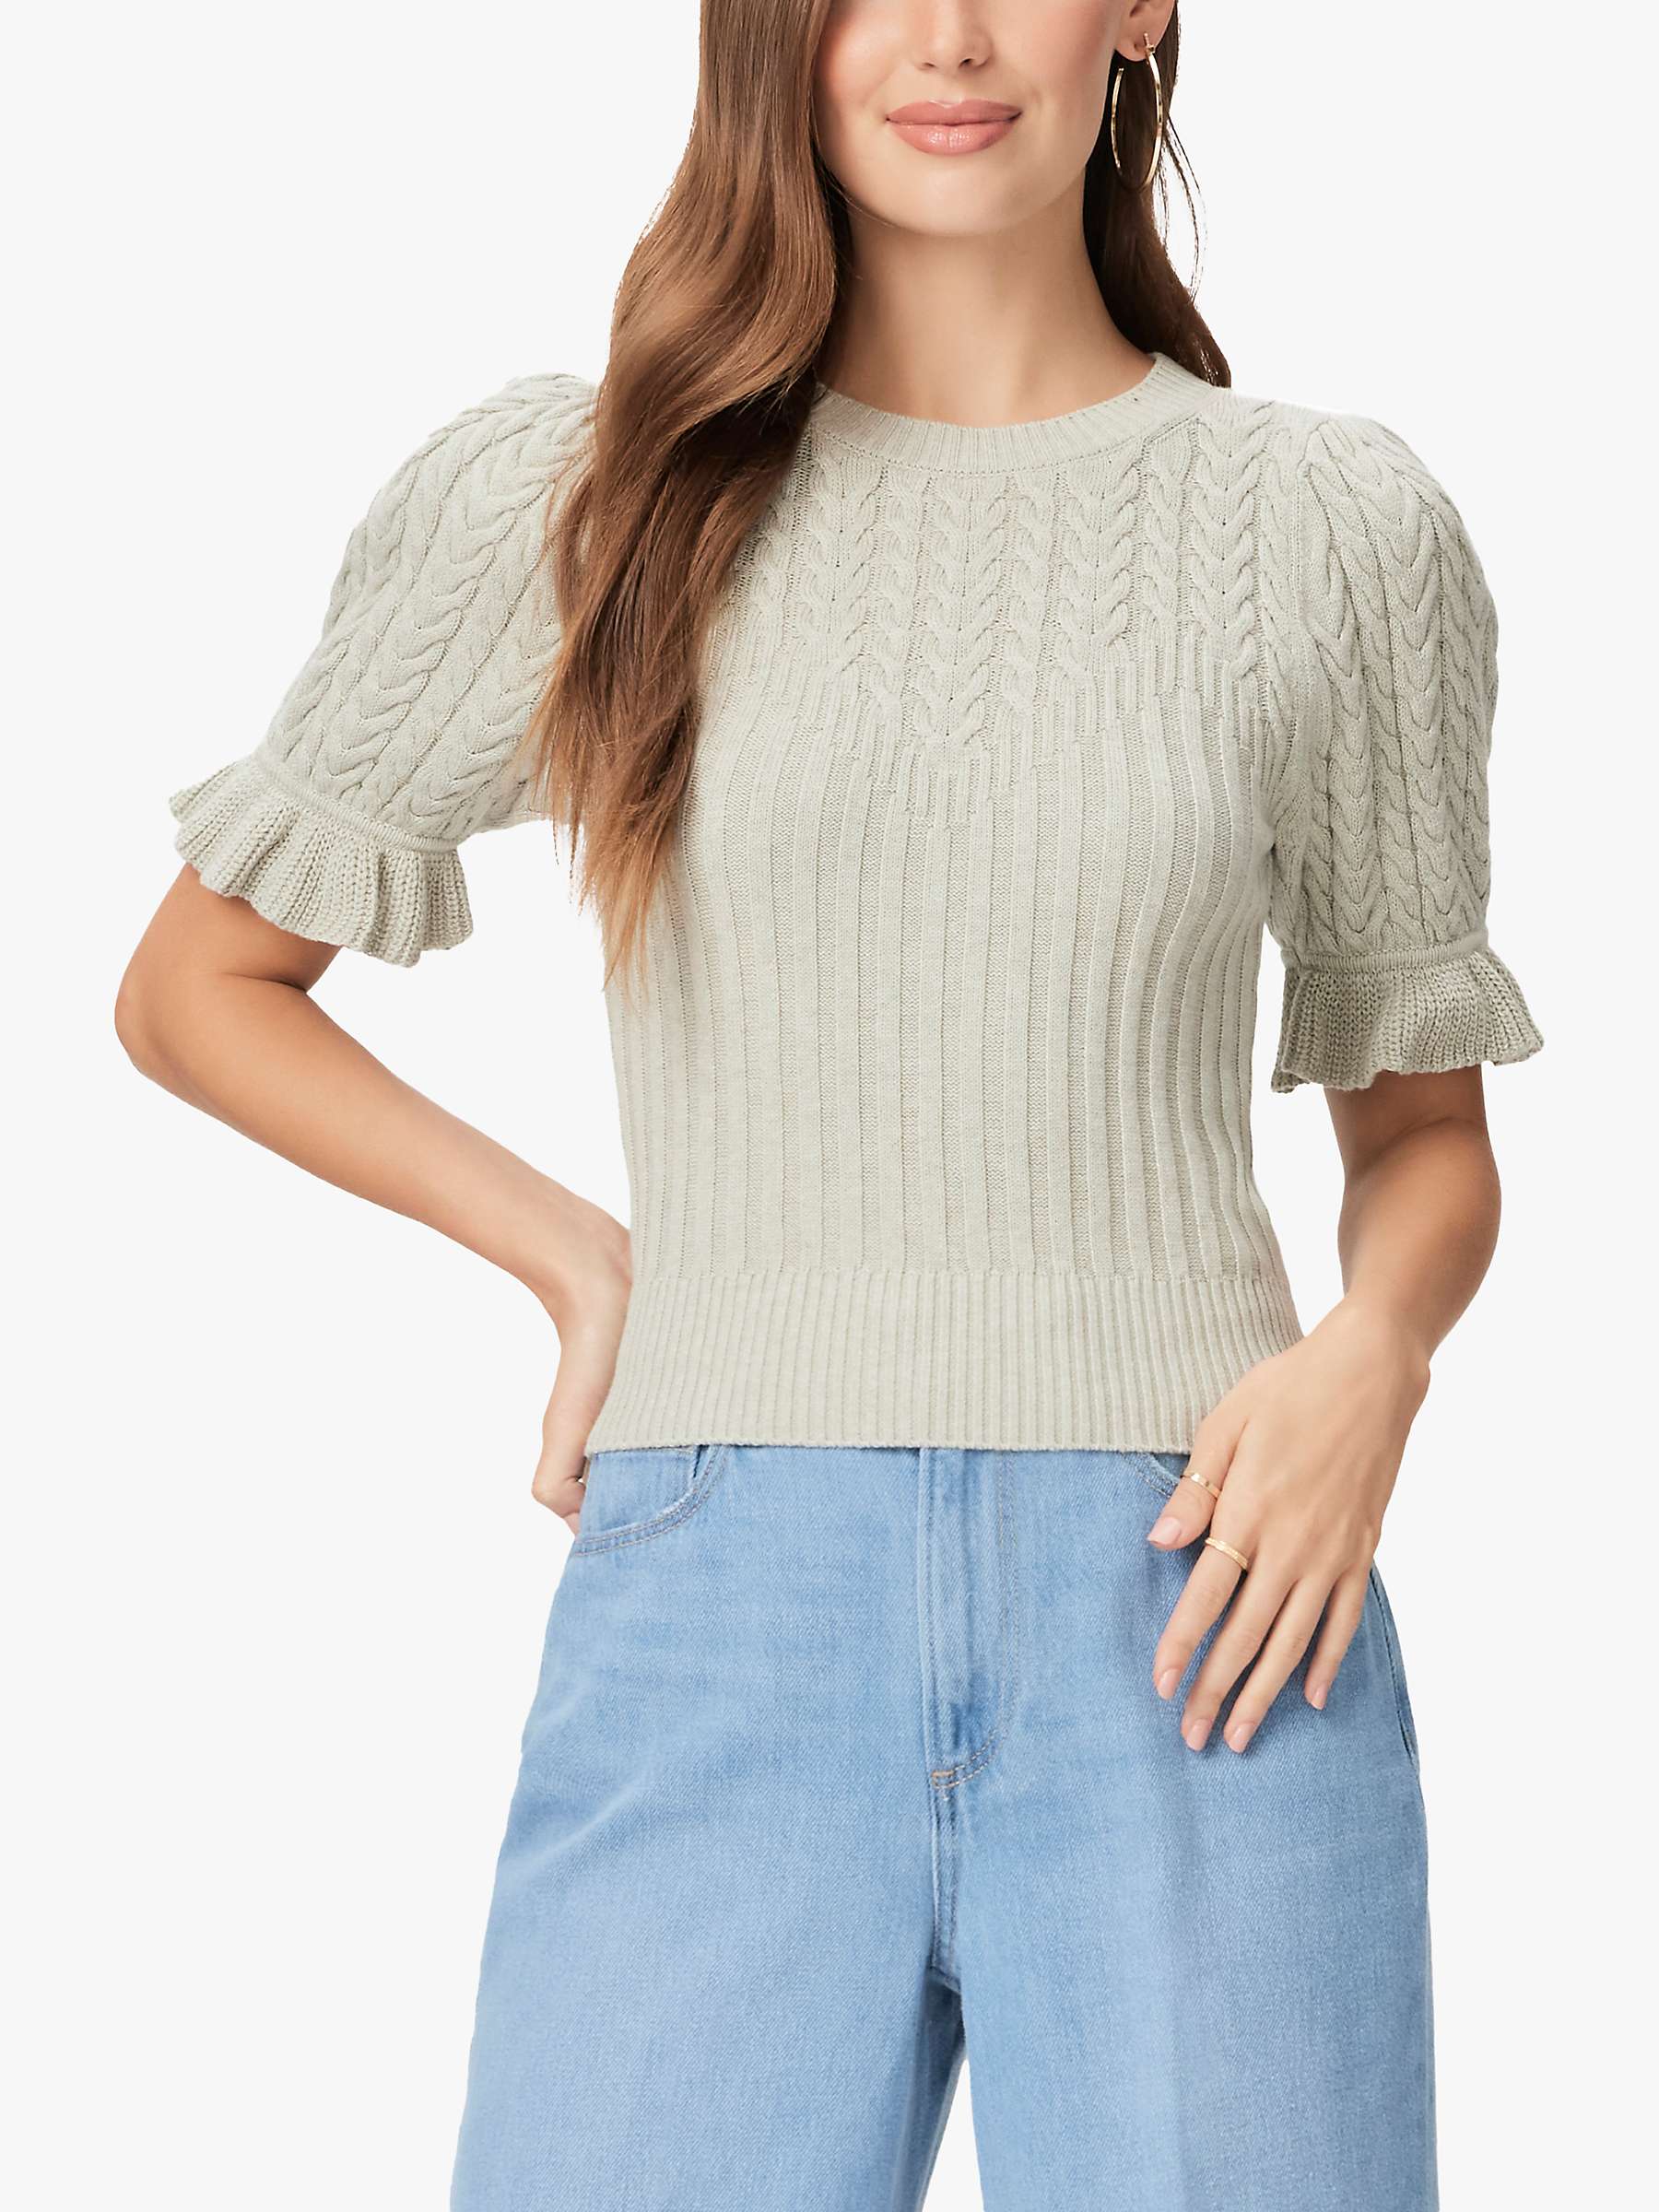 Buy PAIGE Ansa Puff Sleeve Organic Cotton Blend Knit Top, Pale Sage Online at johnlewis.com